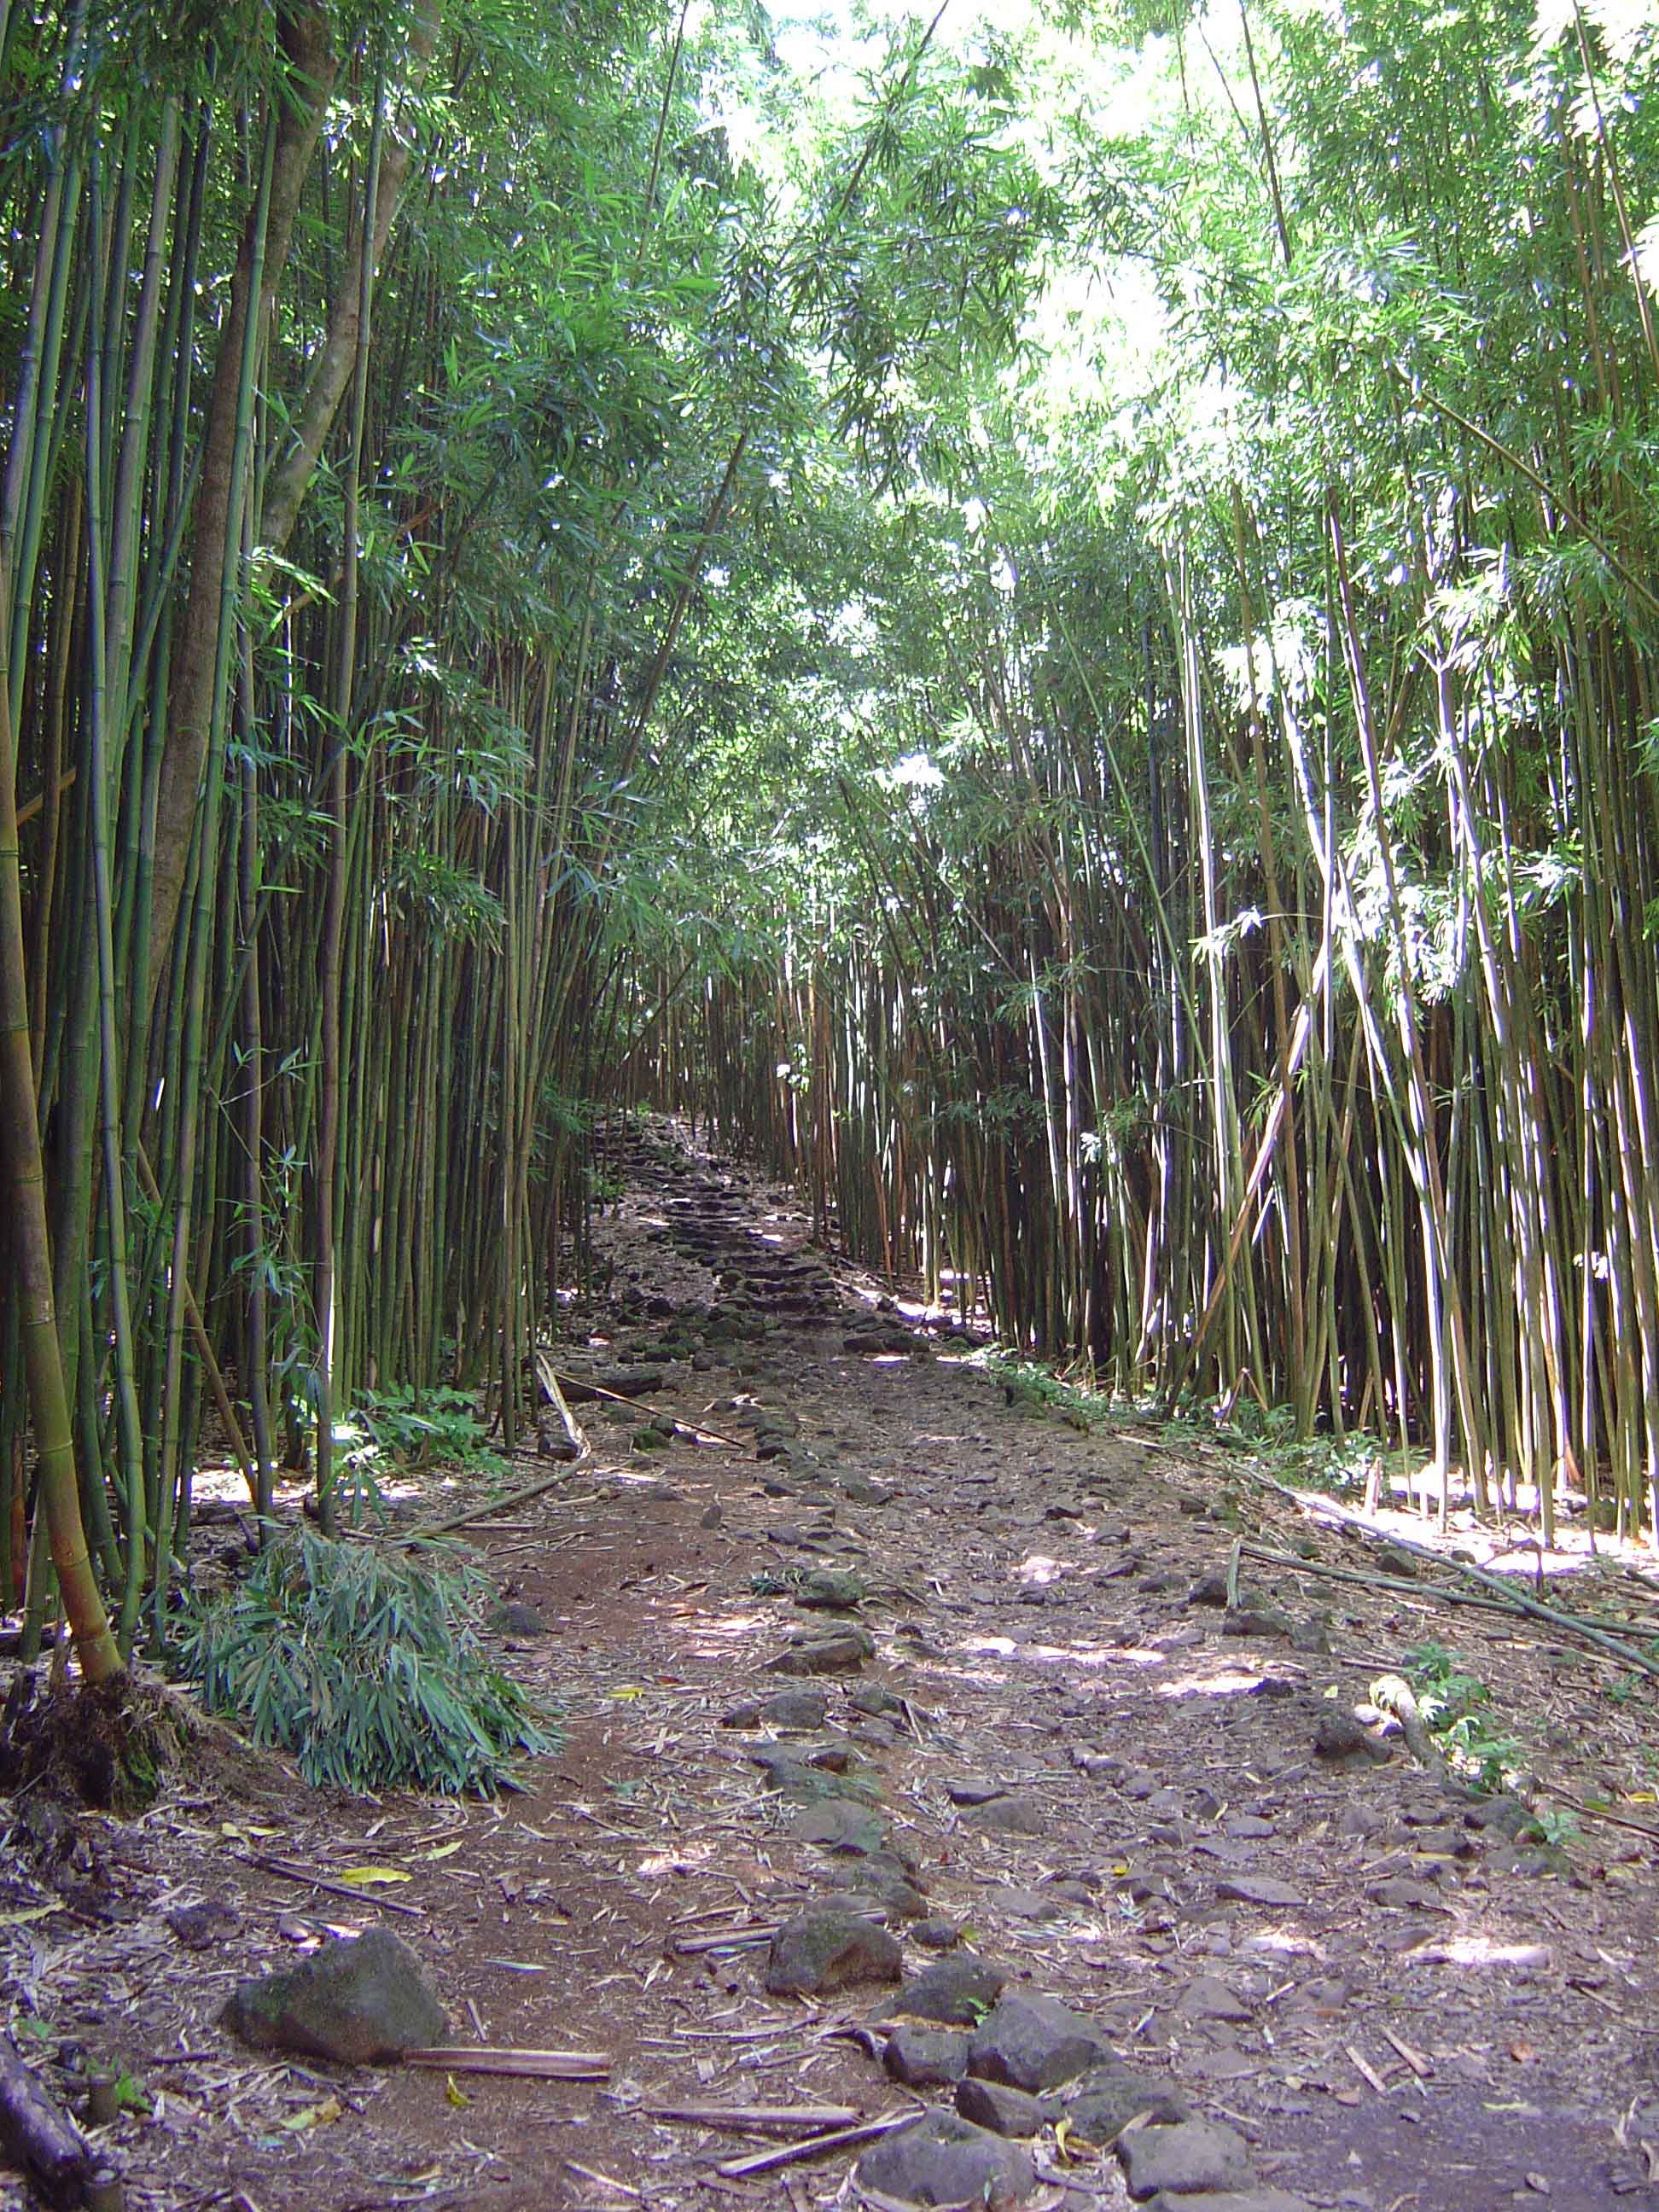 The Trail thru the Bamboo Forest ...